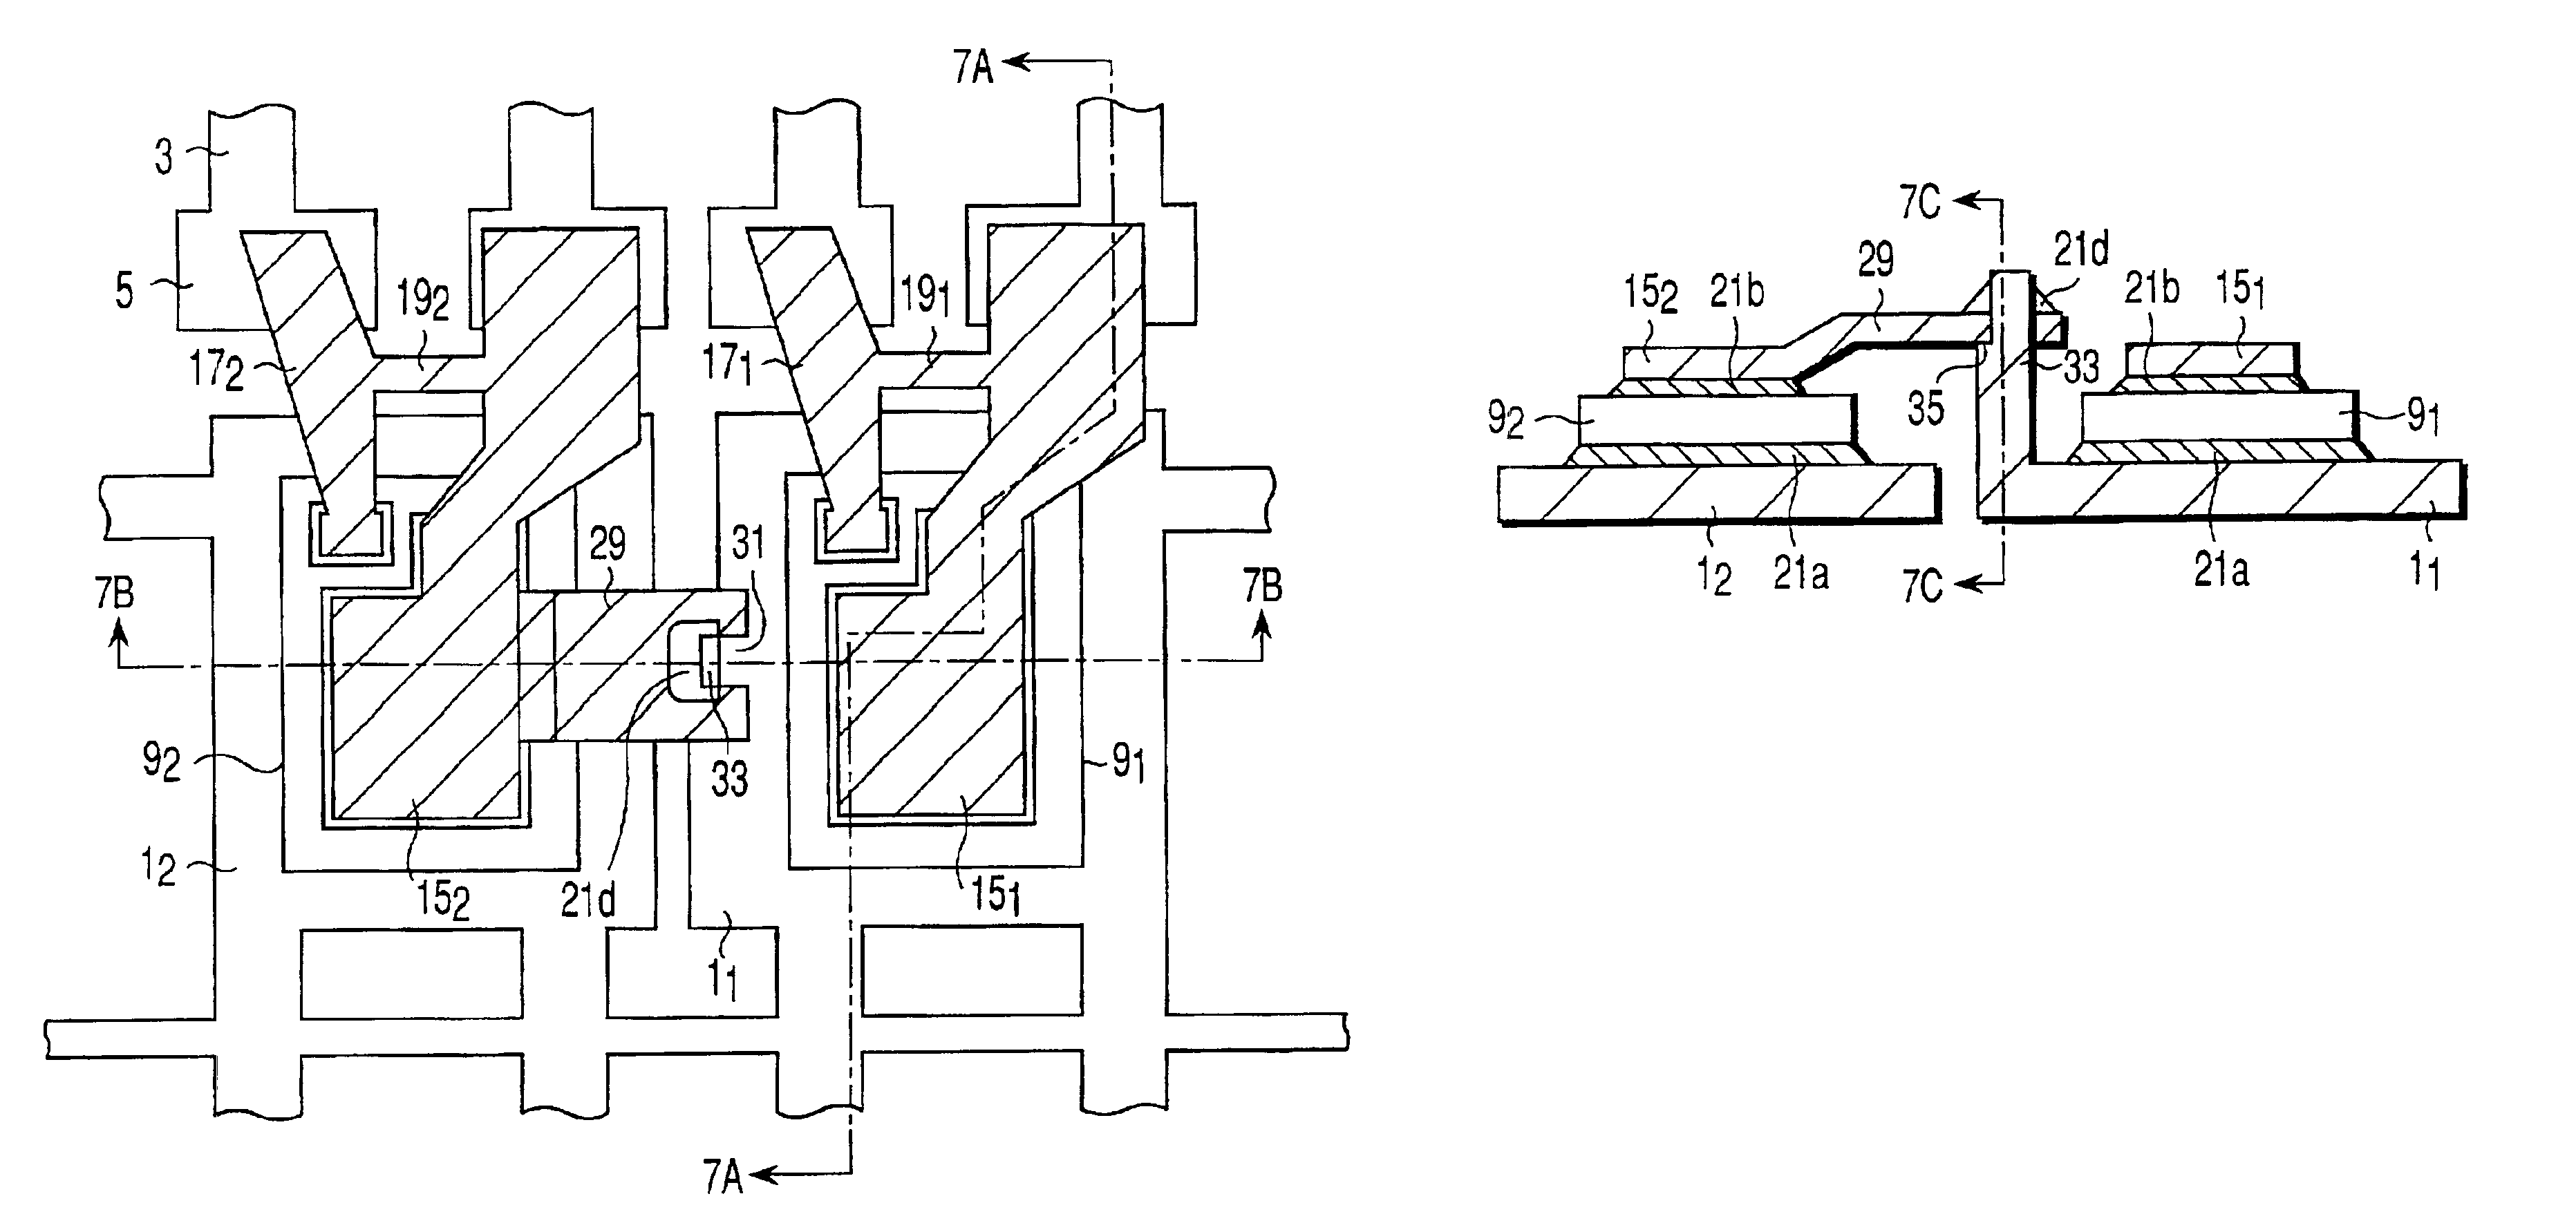 Semiconductor device manufacturing method and semiconductor device manufactured thereby